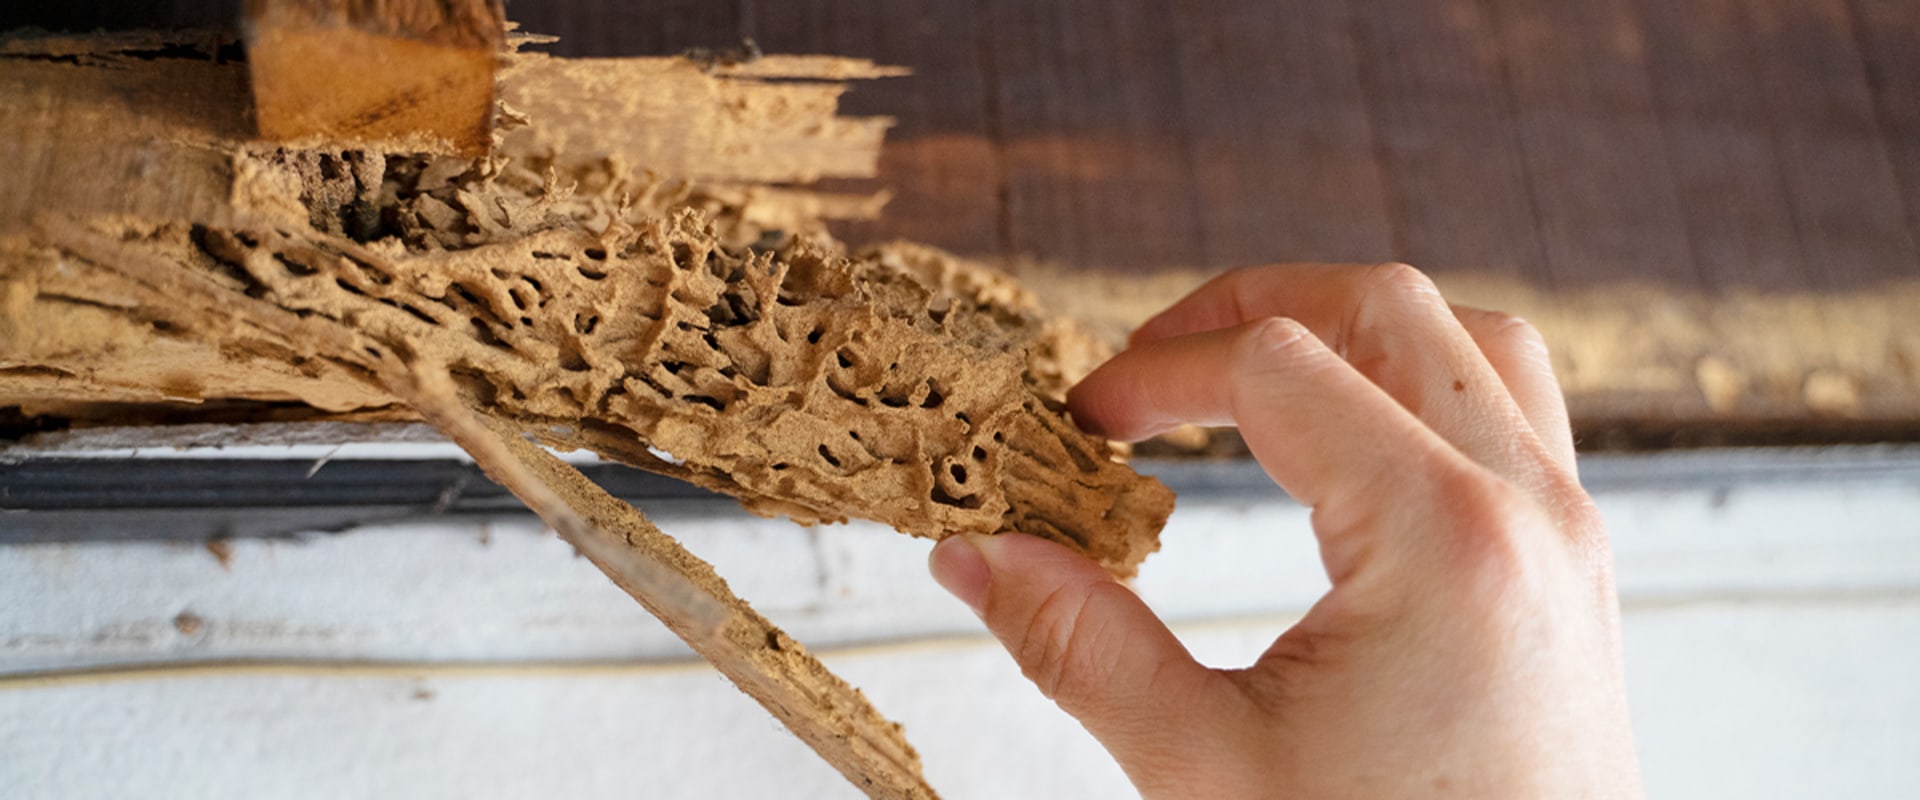 Hiring a Professional for Termite Control